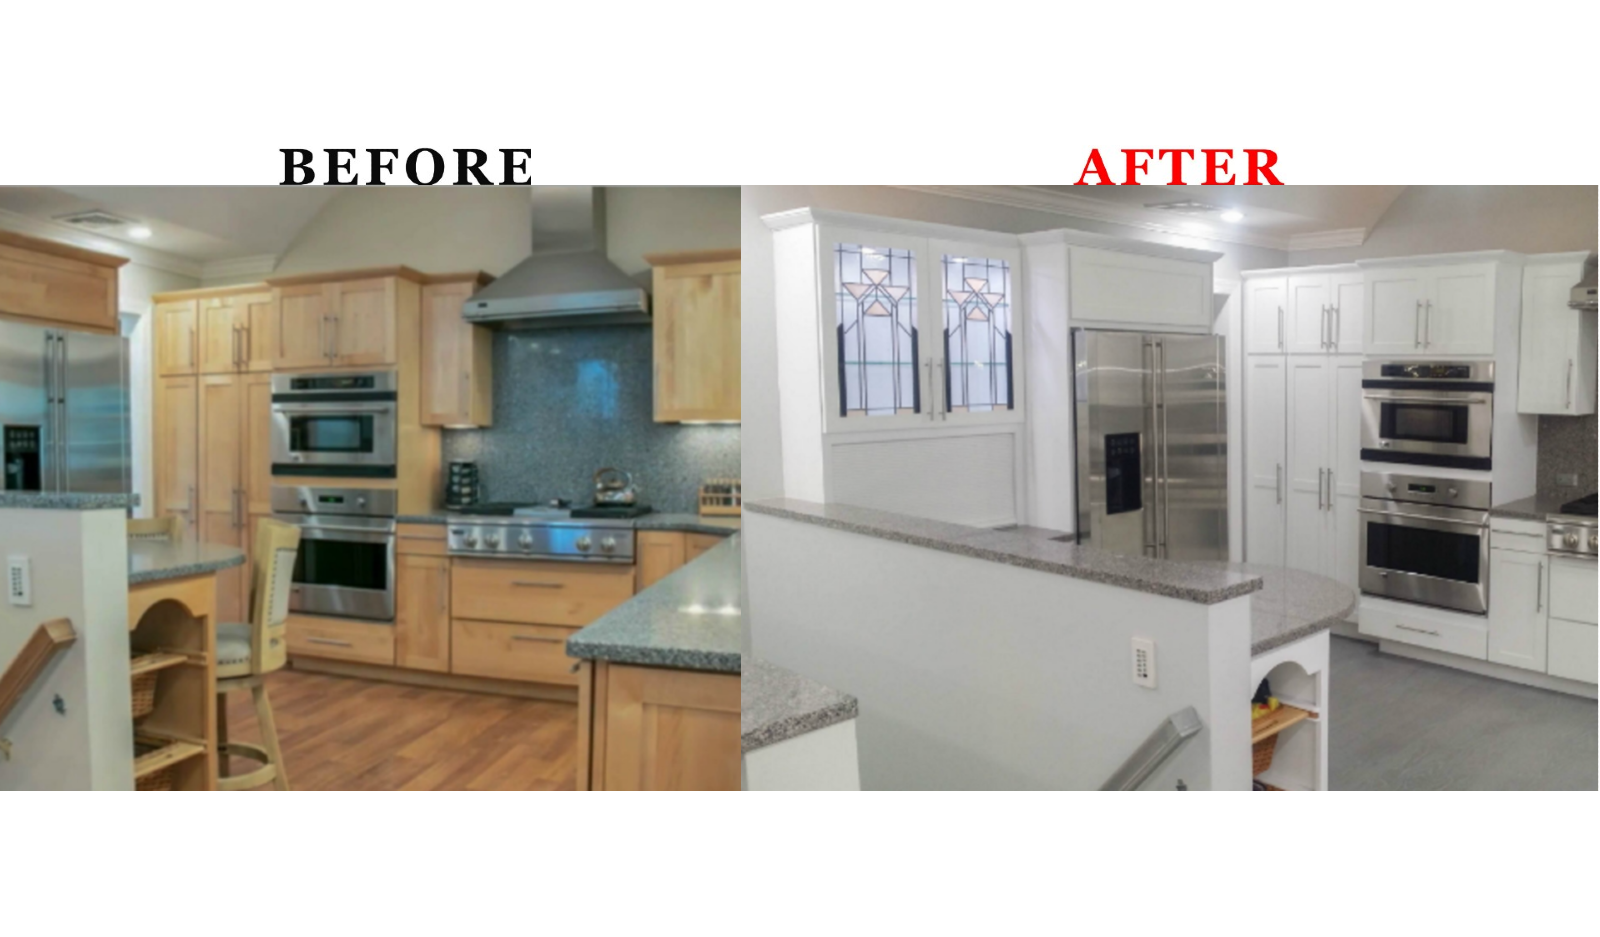 resurfacing kitchen sink before and after